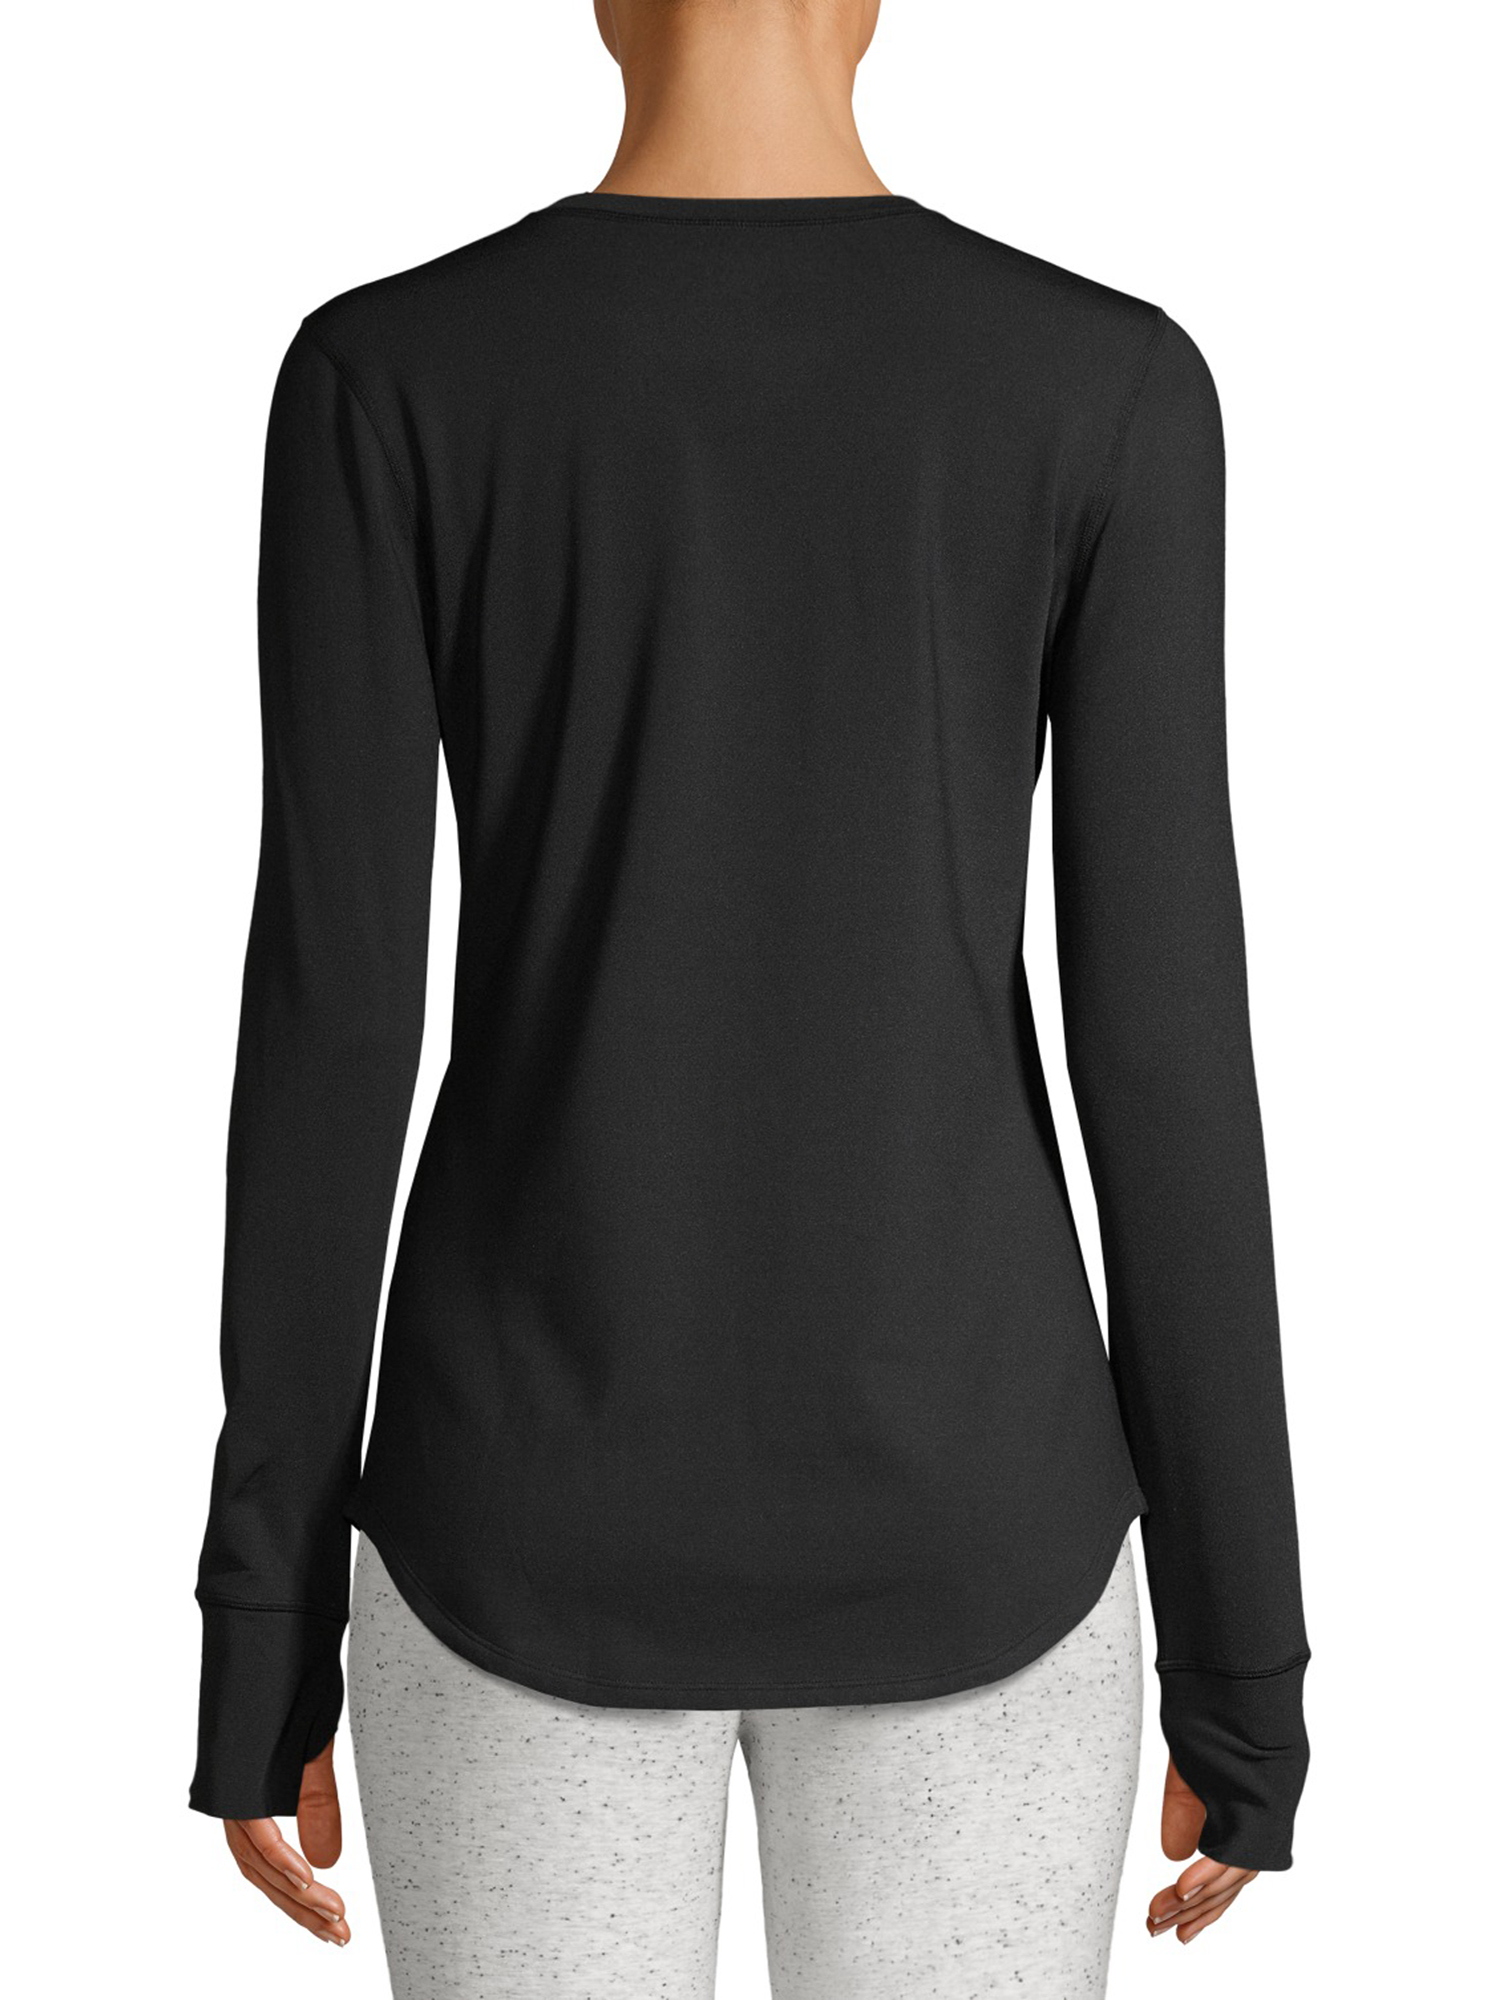 ClimateRight by Cuddl Duds Women's Thermal Guard Base Layer Crew